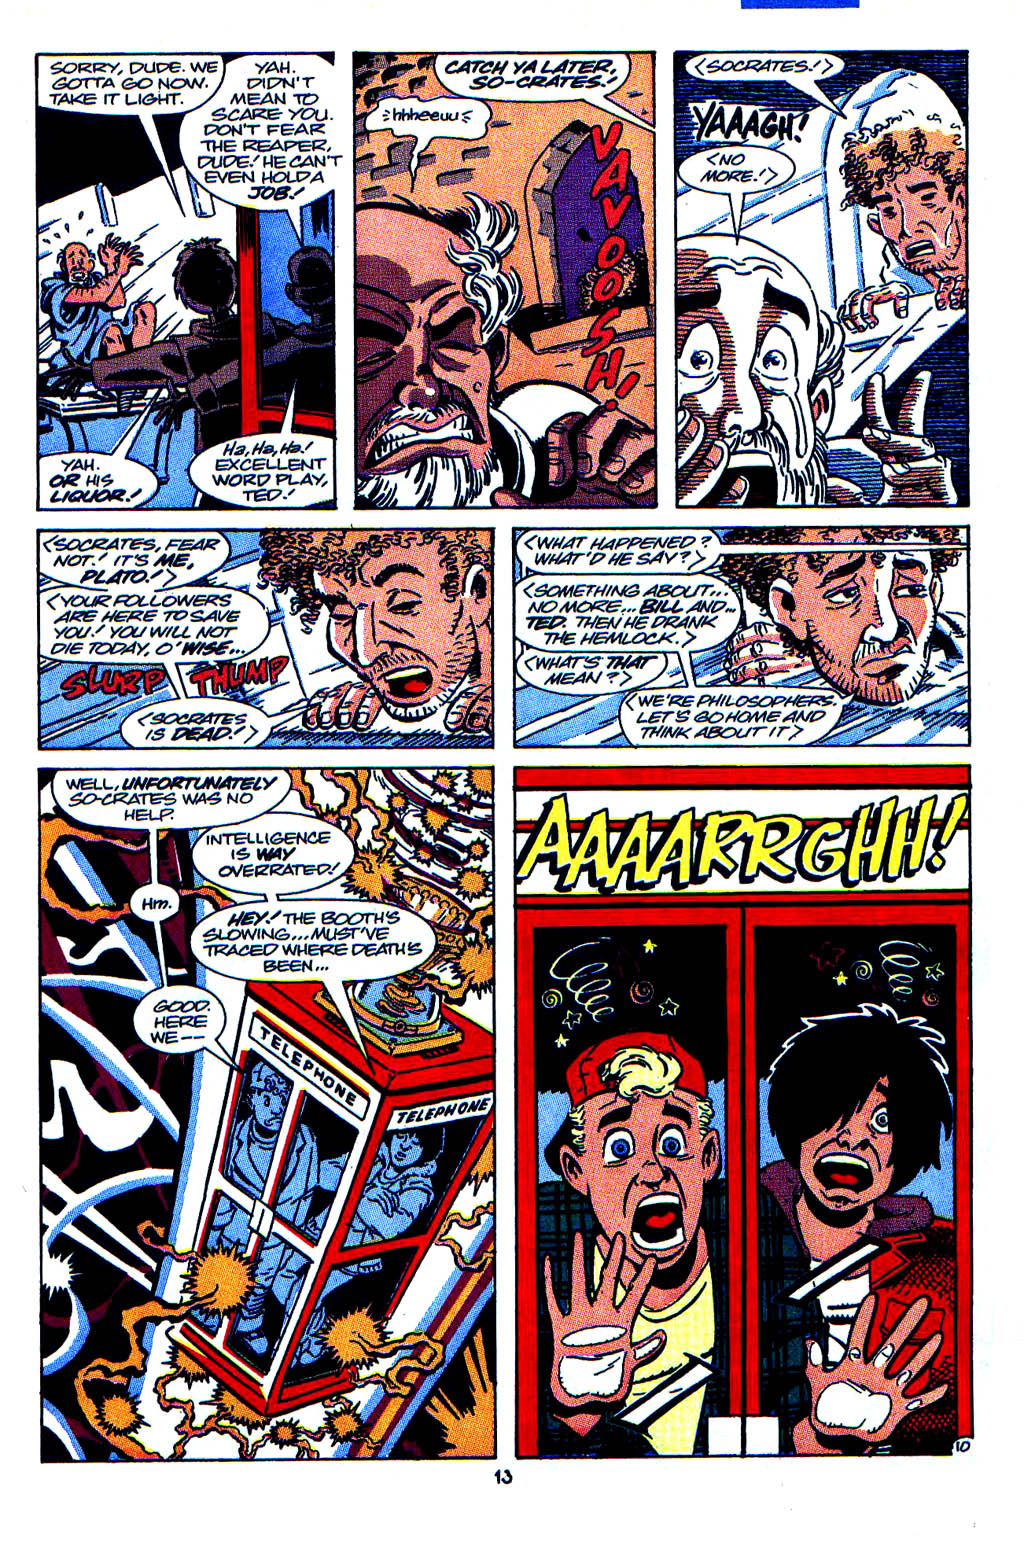 Read online Bill & Ted's Excellent Comic Book comic -  Issue #2 - 11